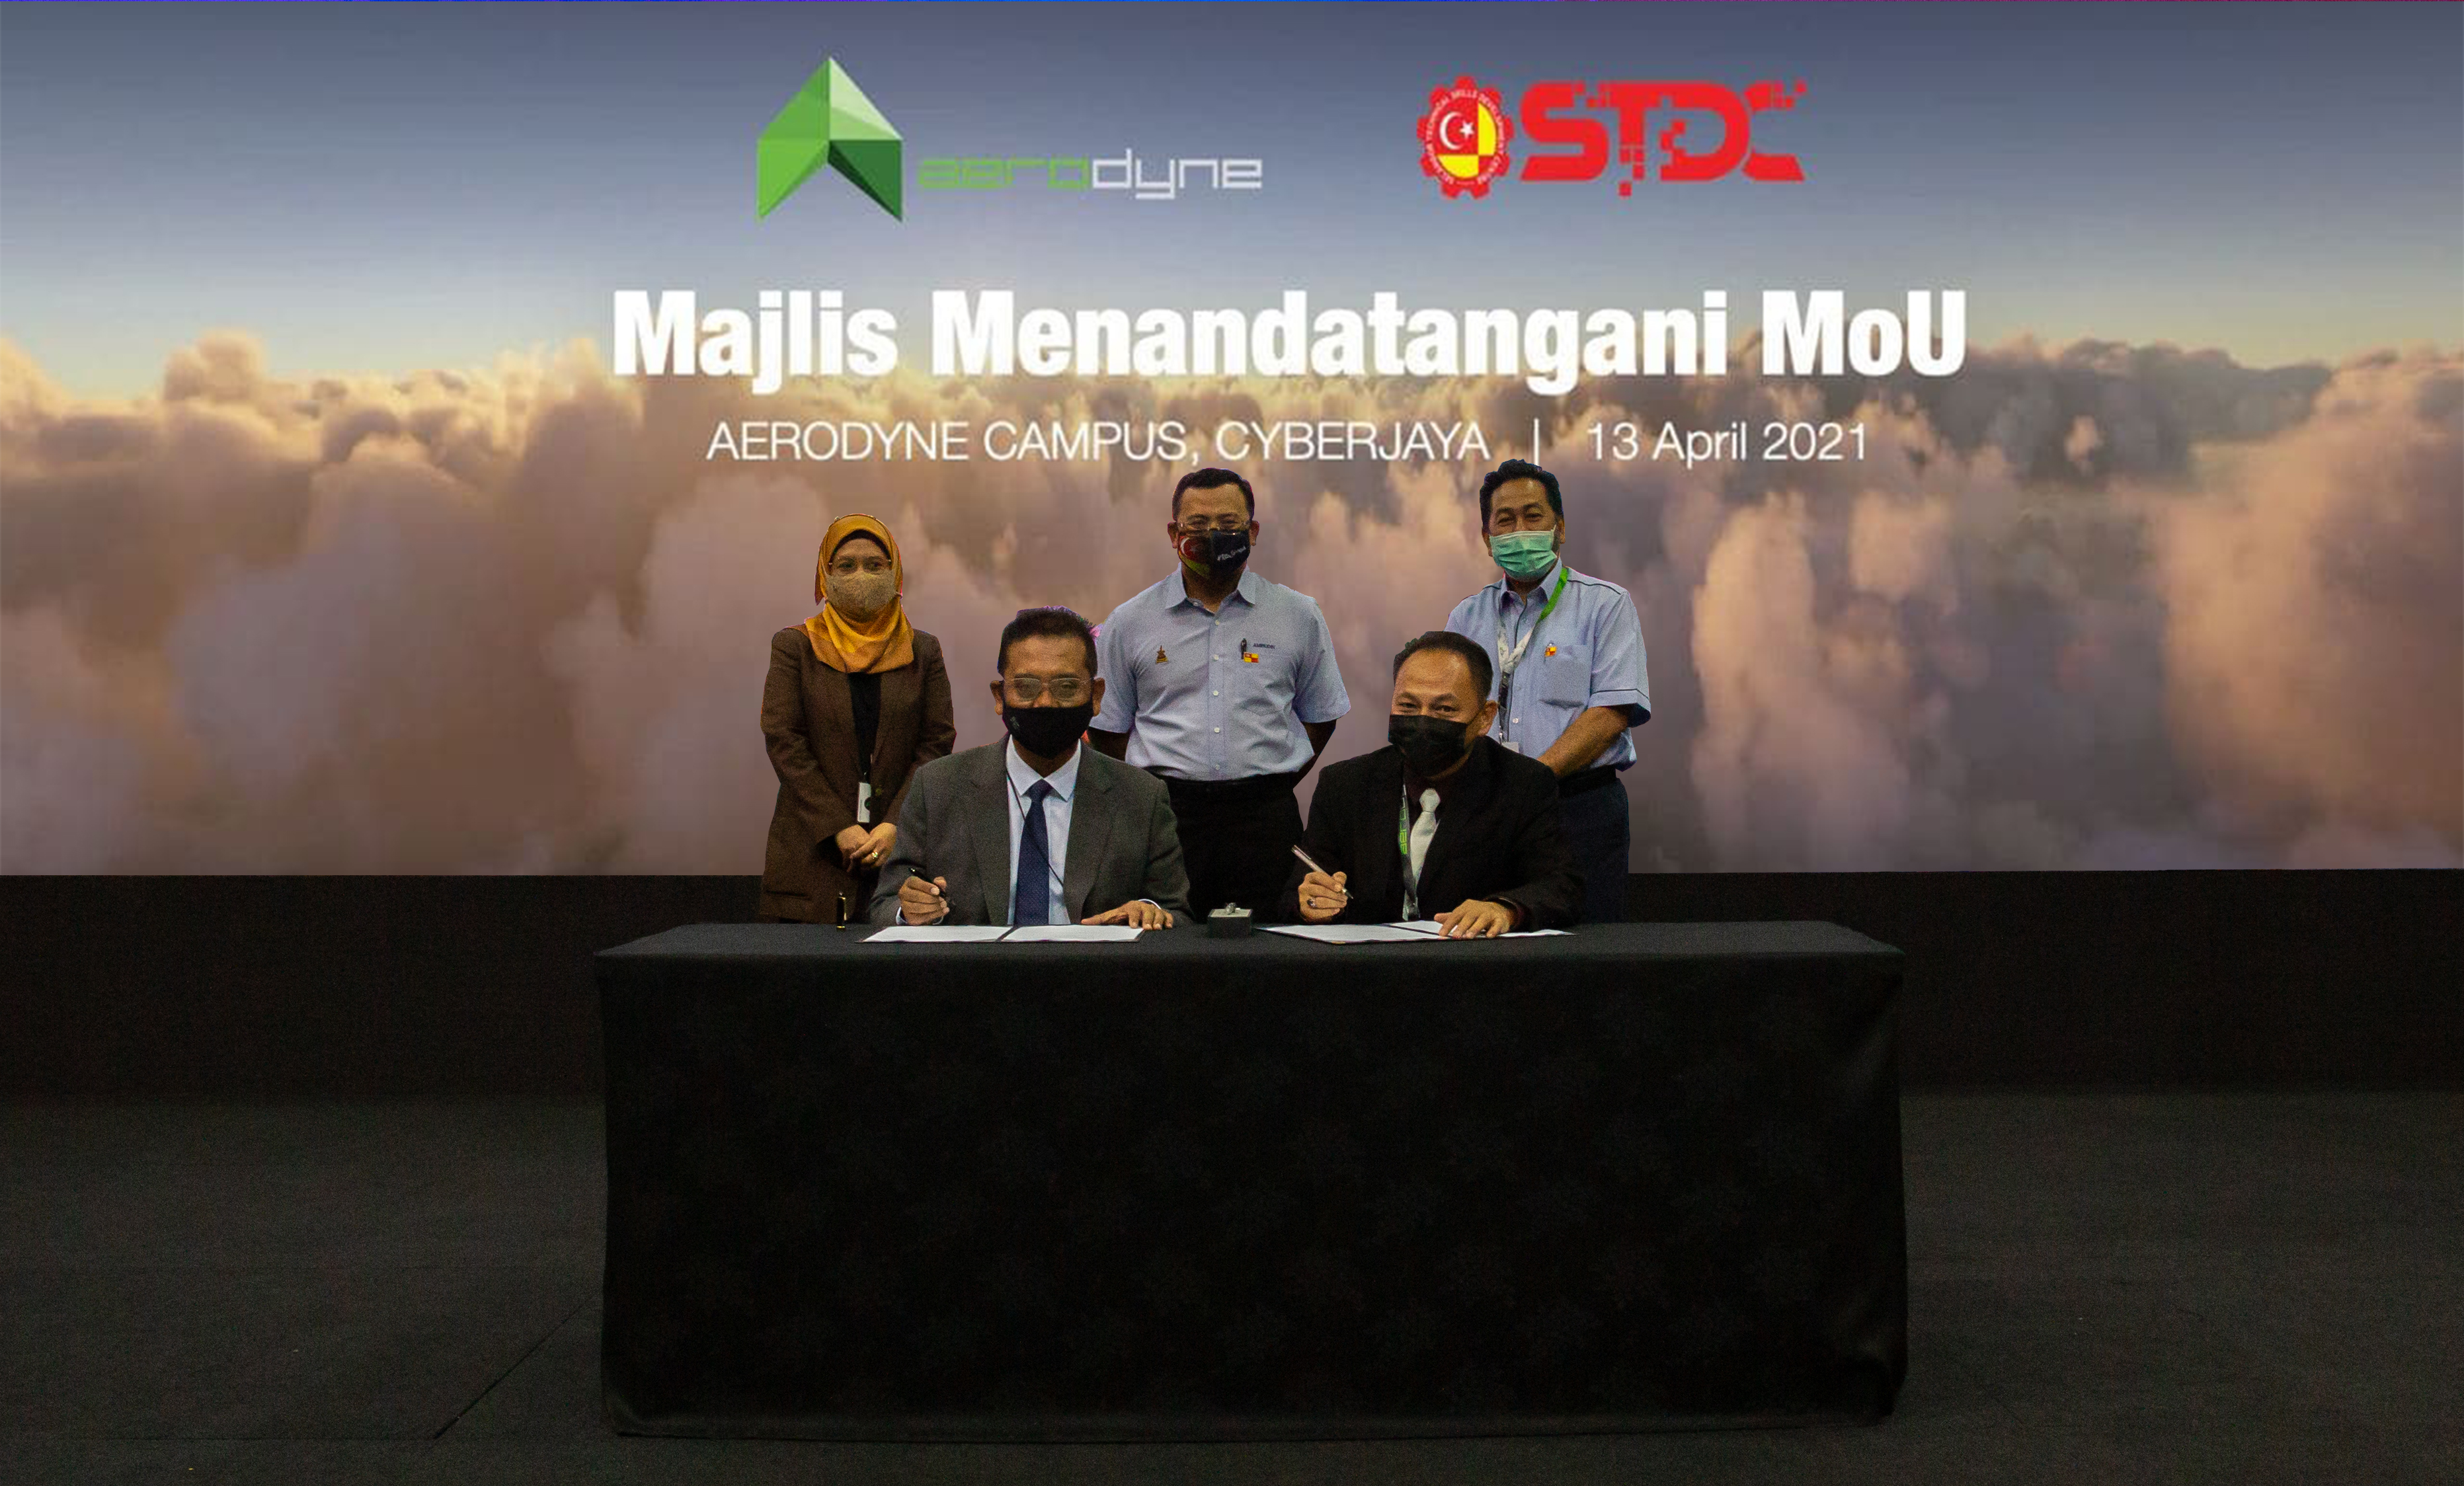 (Left to right), Kamarul Muhamed, founder & group CEO, Aerodyne and Mohd Asyraf Bin Amin, CEO, STDC. Witnessing the signing is Menteri Besar Selangor, Amirudin Shari, and other STDC and Aerodyne officials